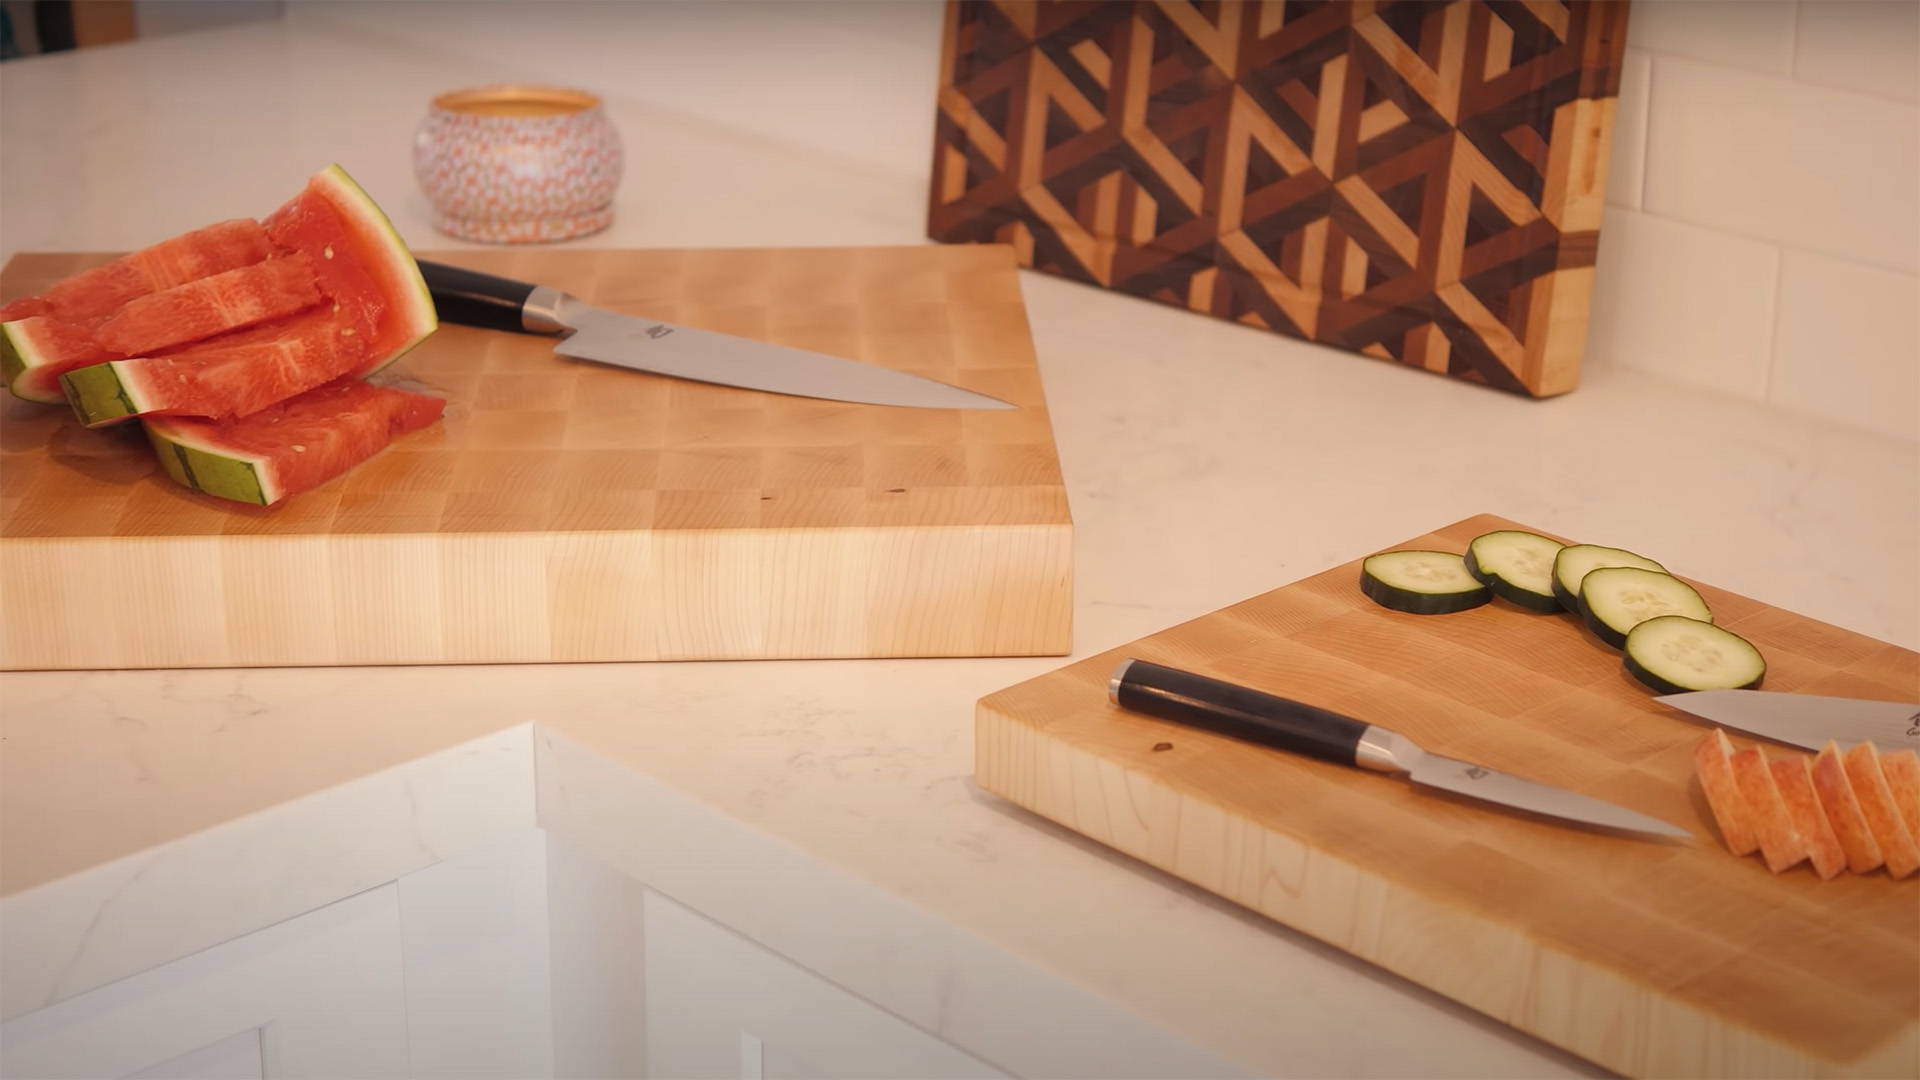  1/2 Blue Poly Cutting Board - A Cut Above the Rest!